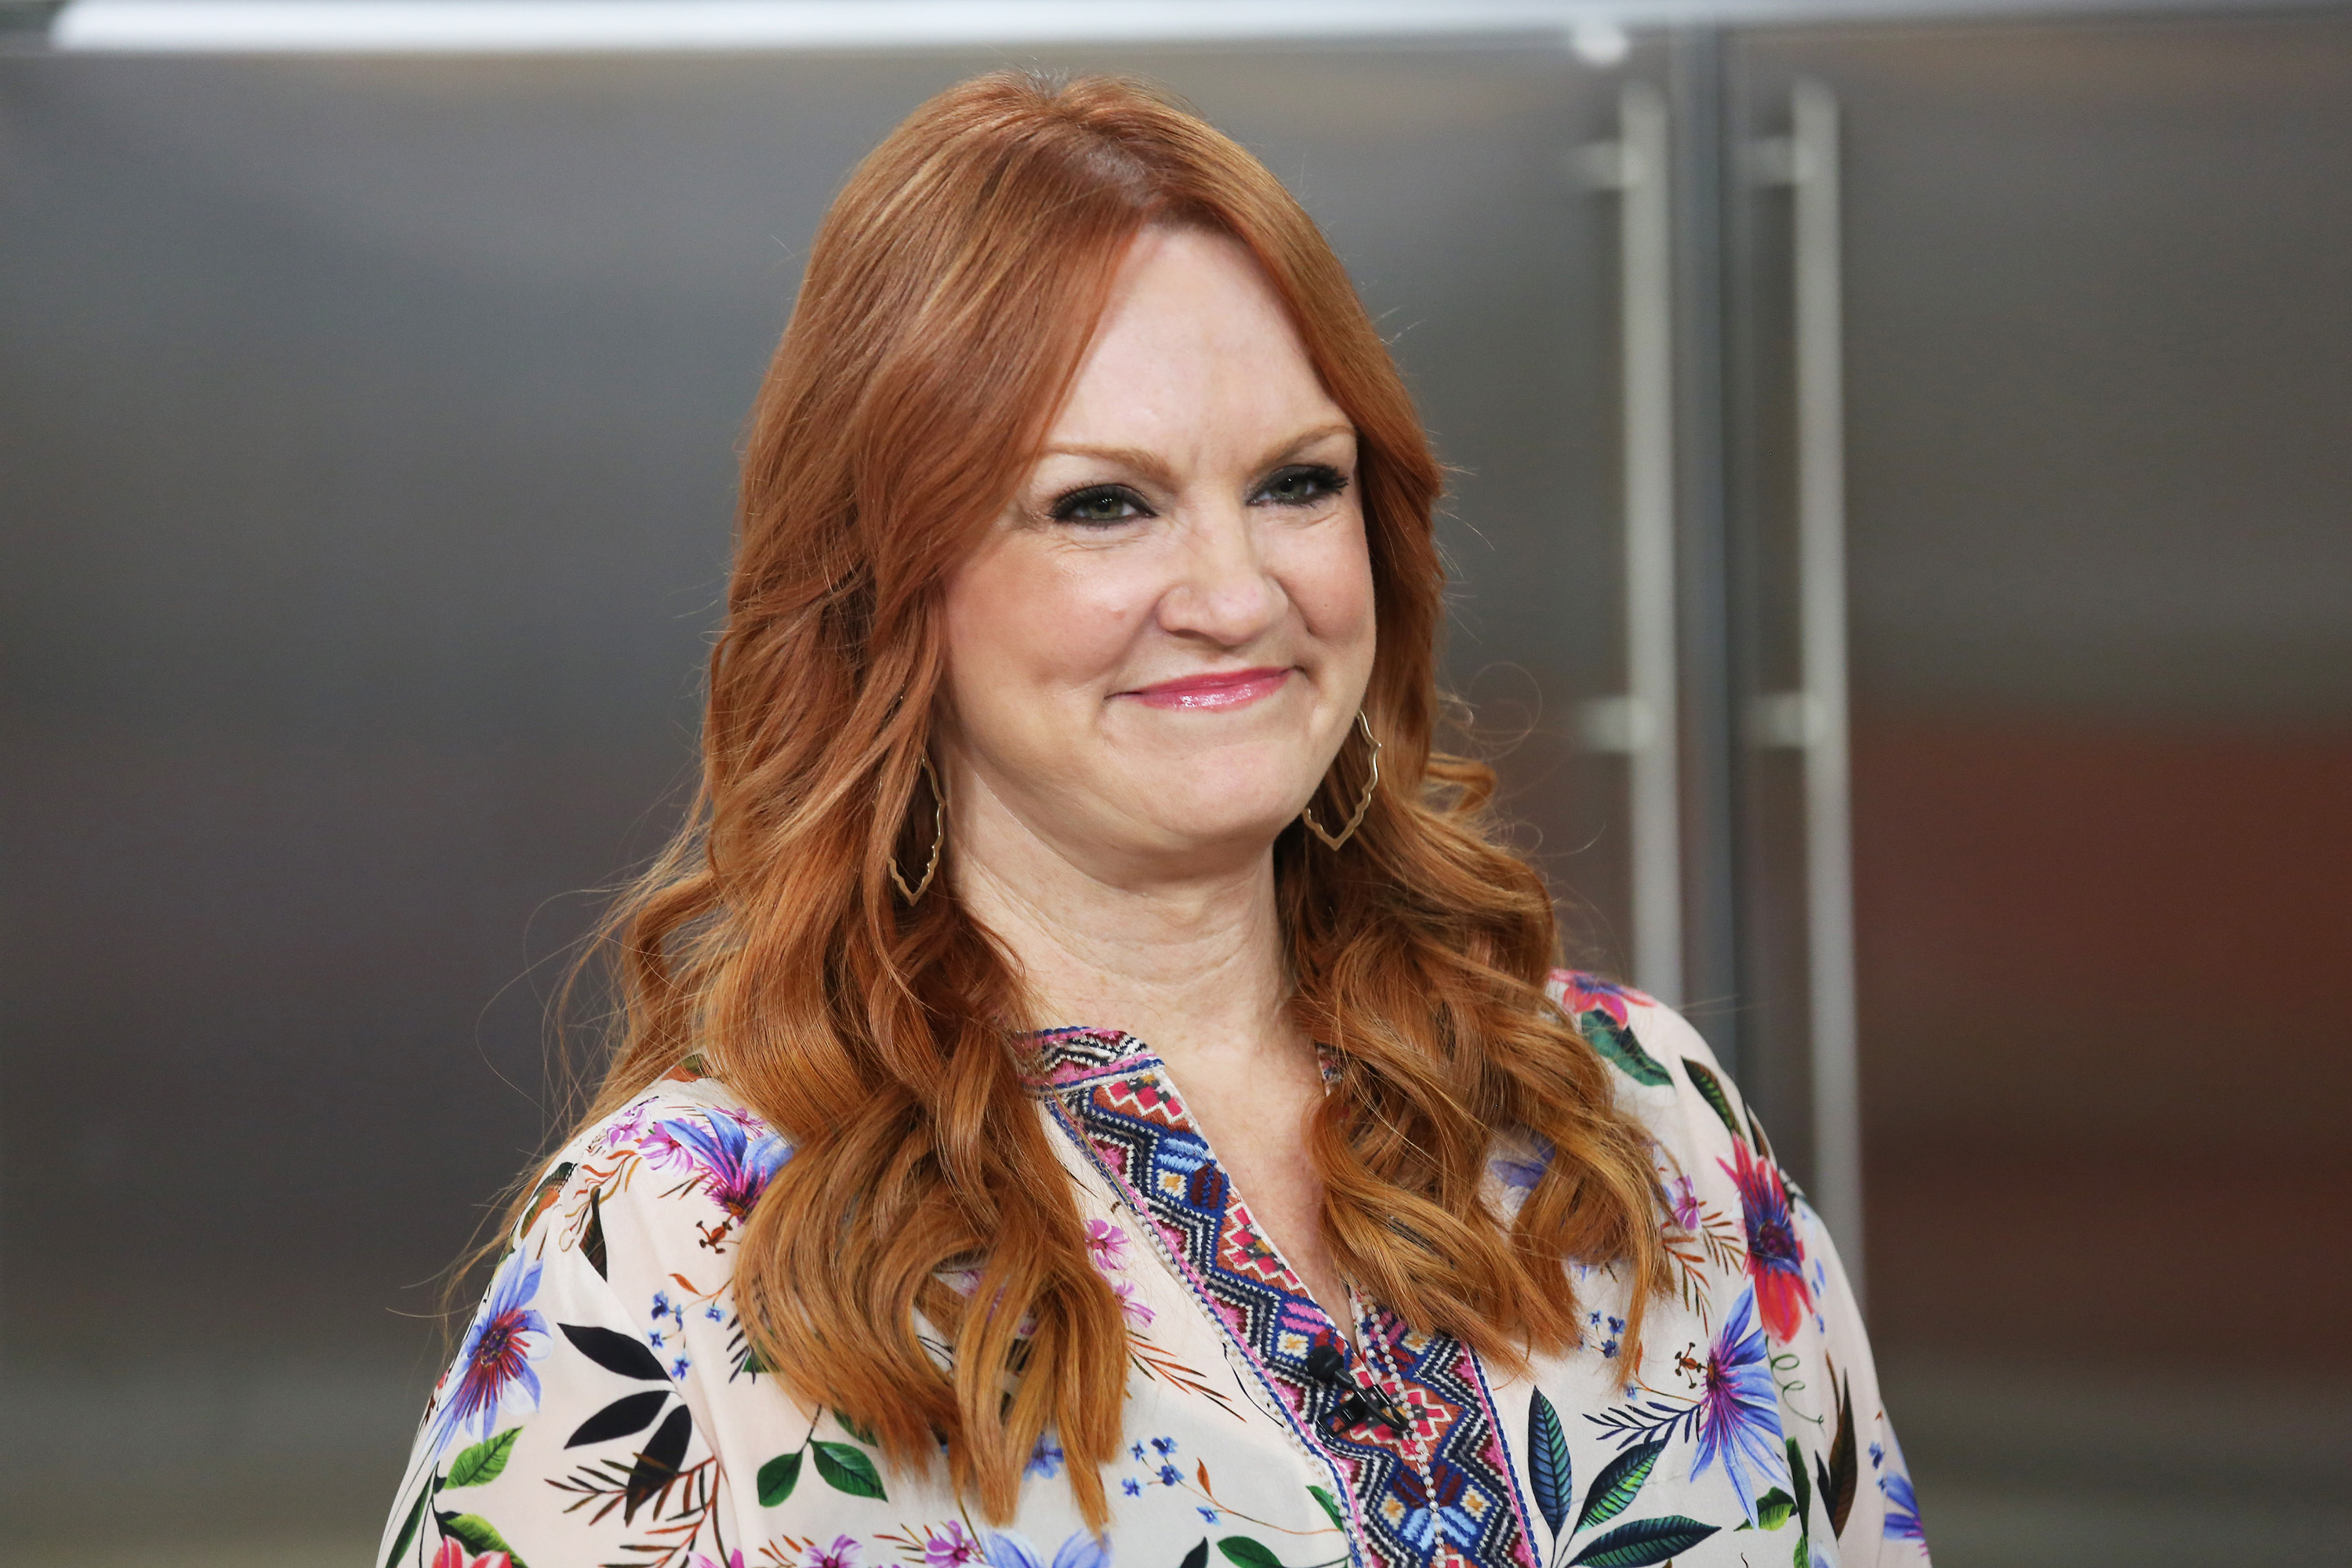 'The Pioneer Woman' Ree Drummond smiles at the camera. She wears a multi-color print top.